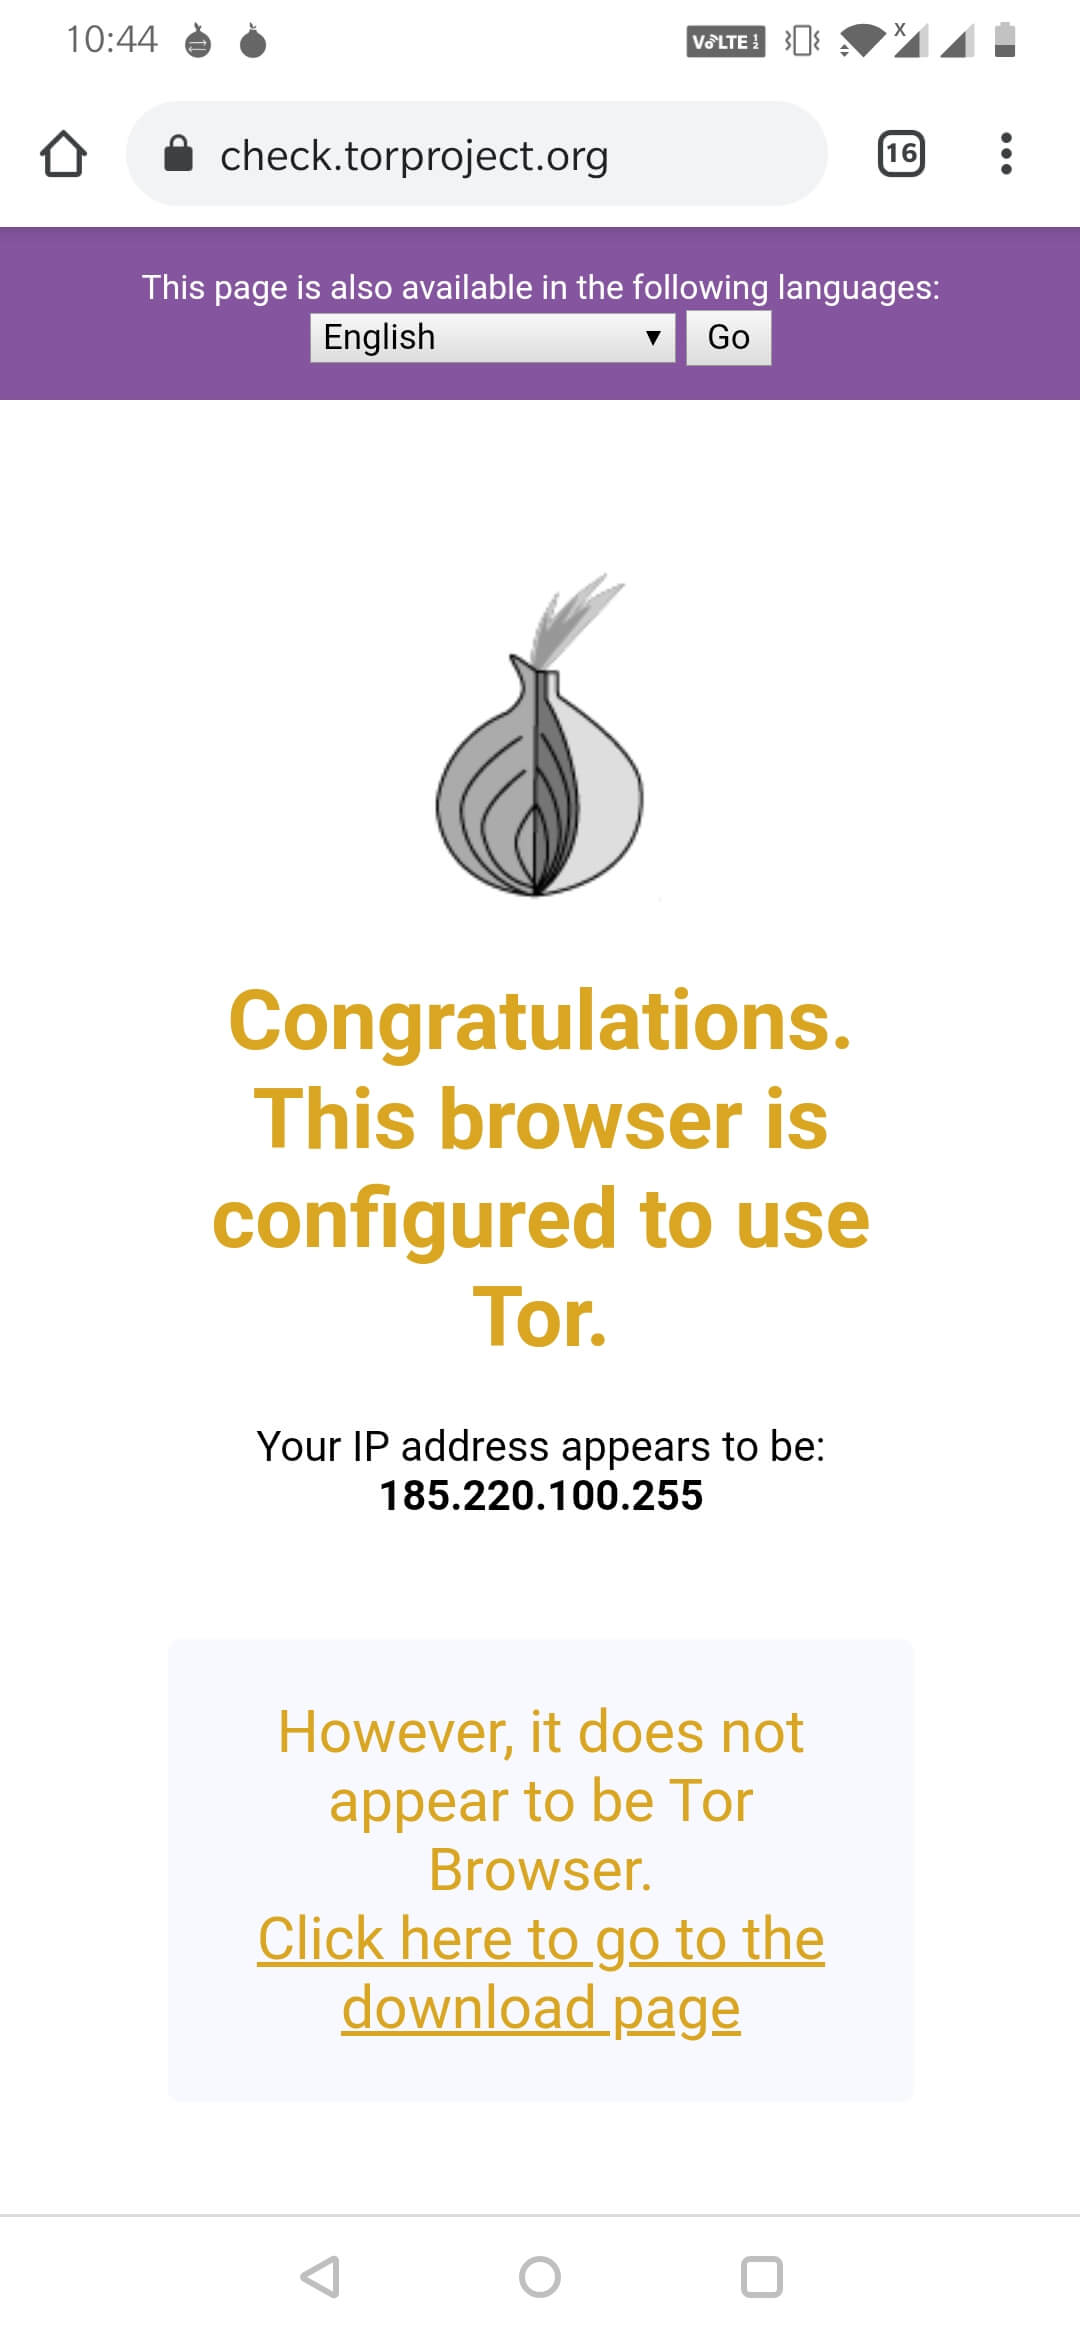 As you solve the CAPTCHA, your browser will be configured to use the Tor browser.